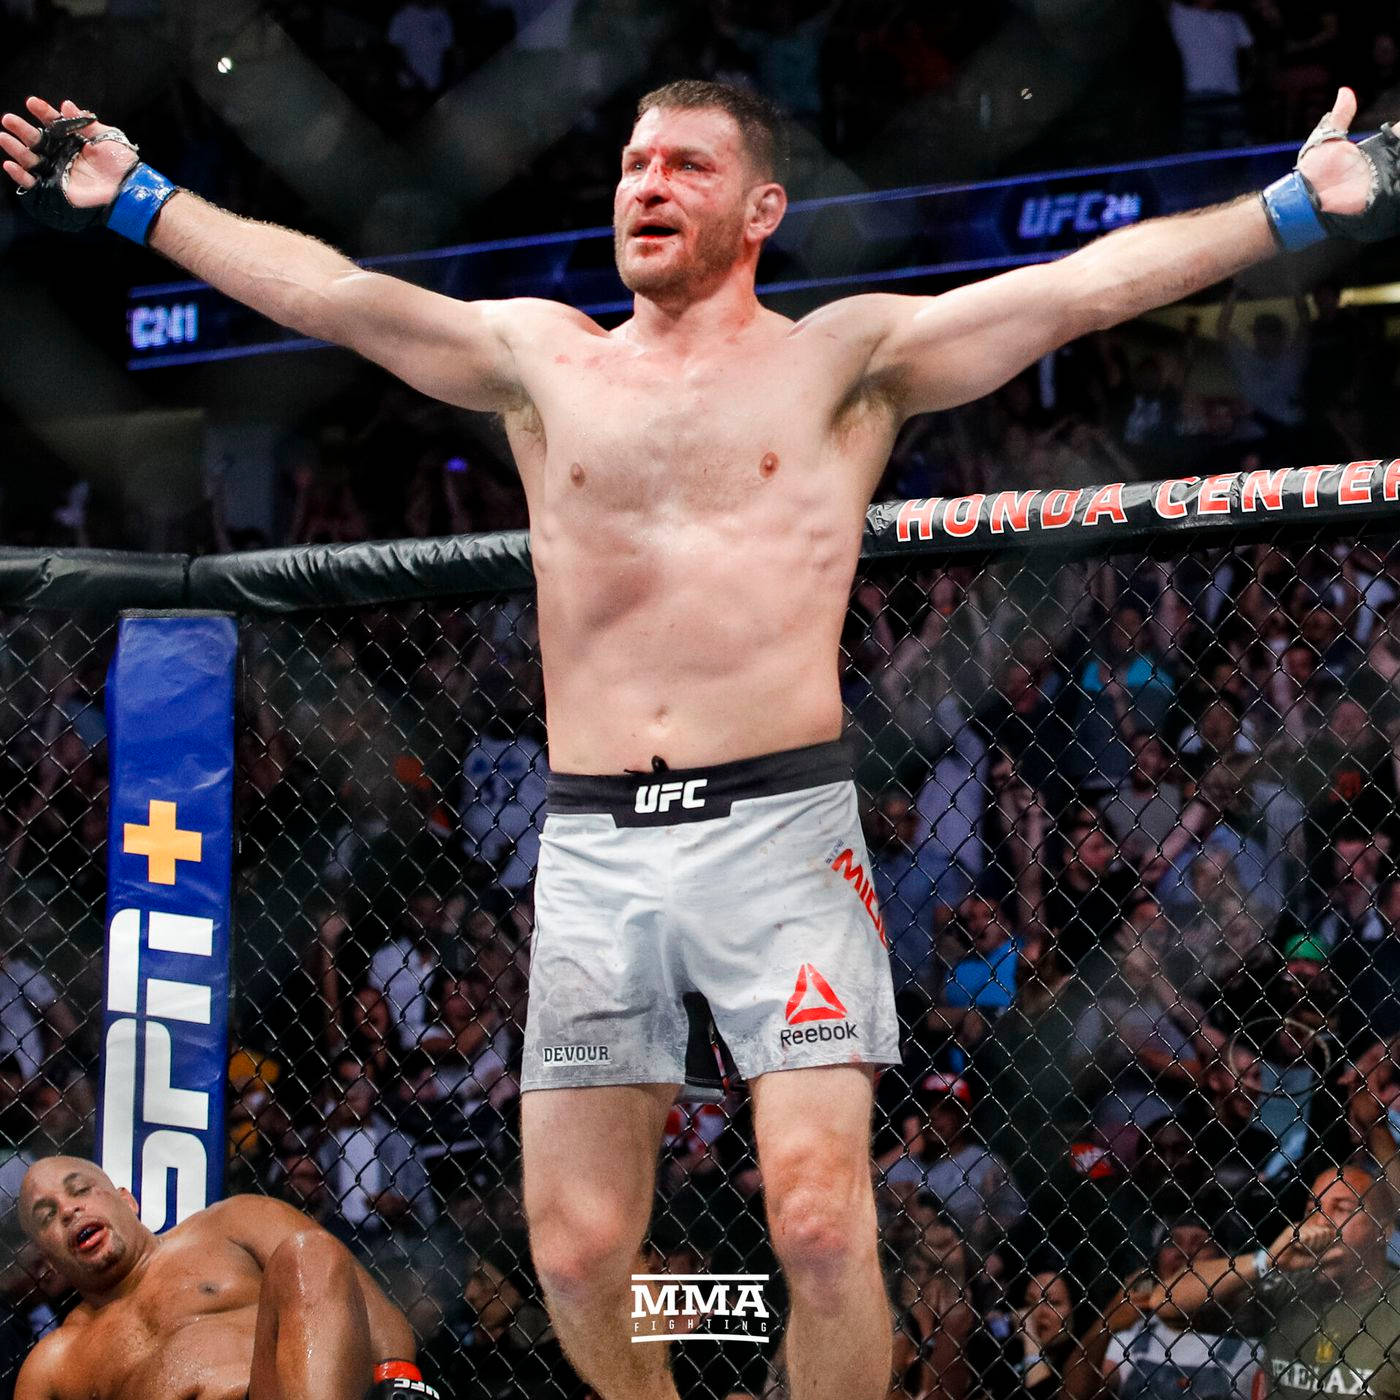 Stipe Miocic With Defeated Opponent Wallpaper